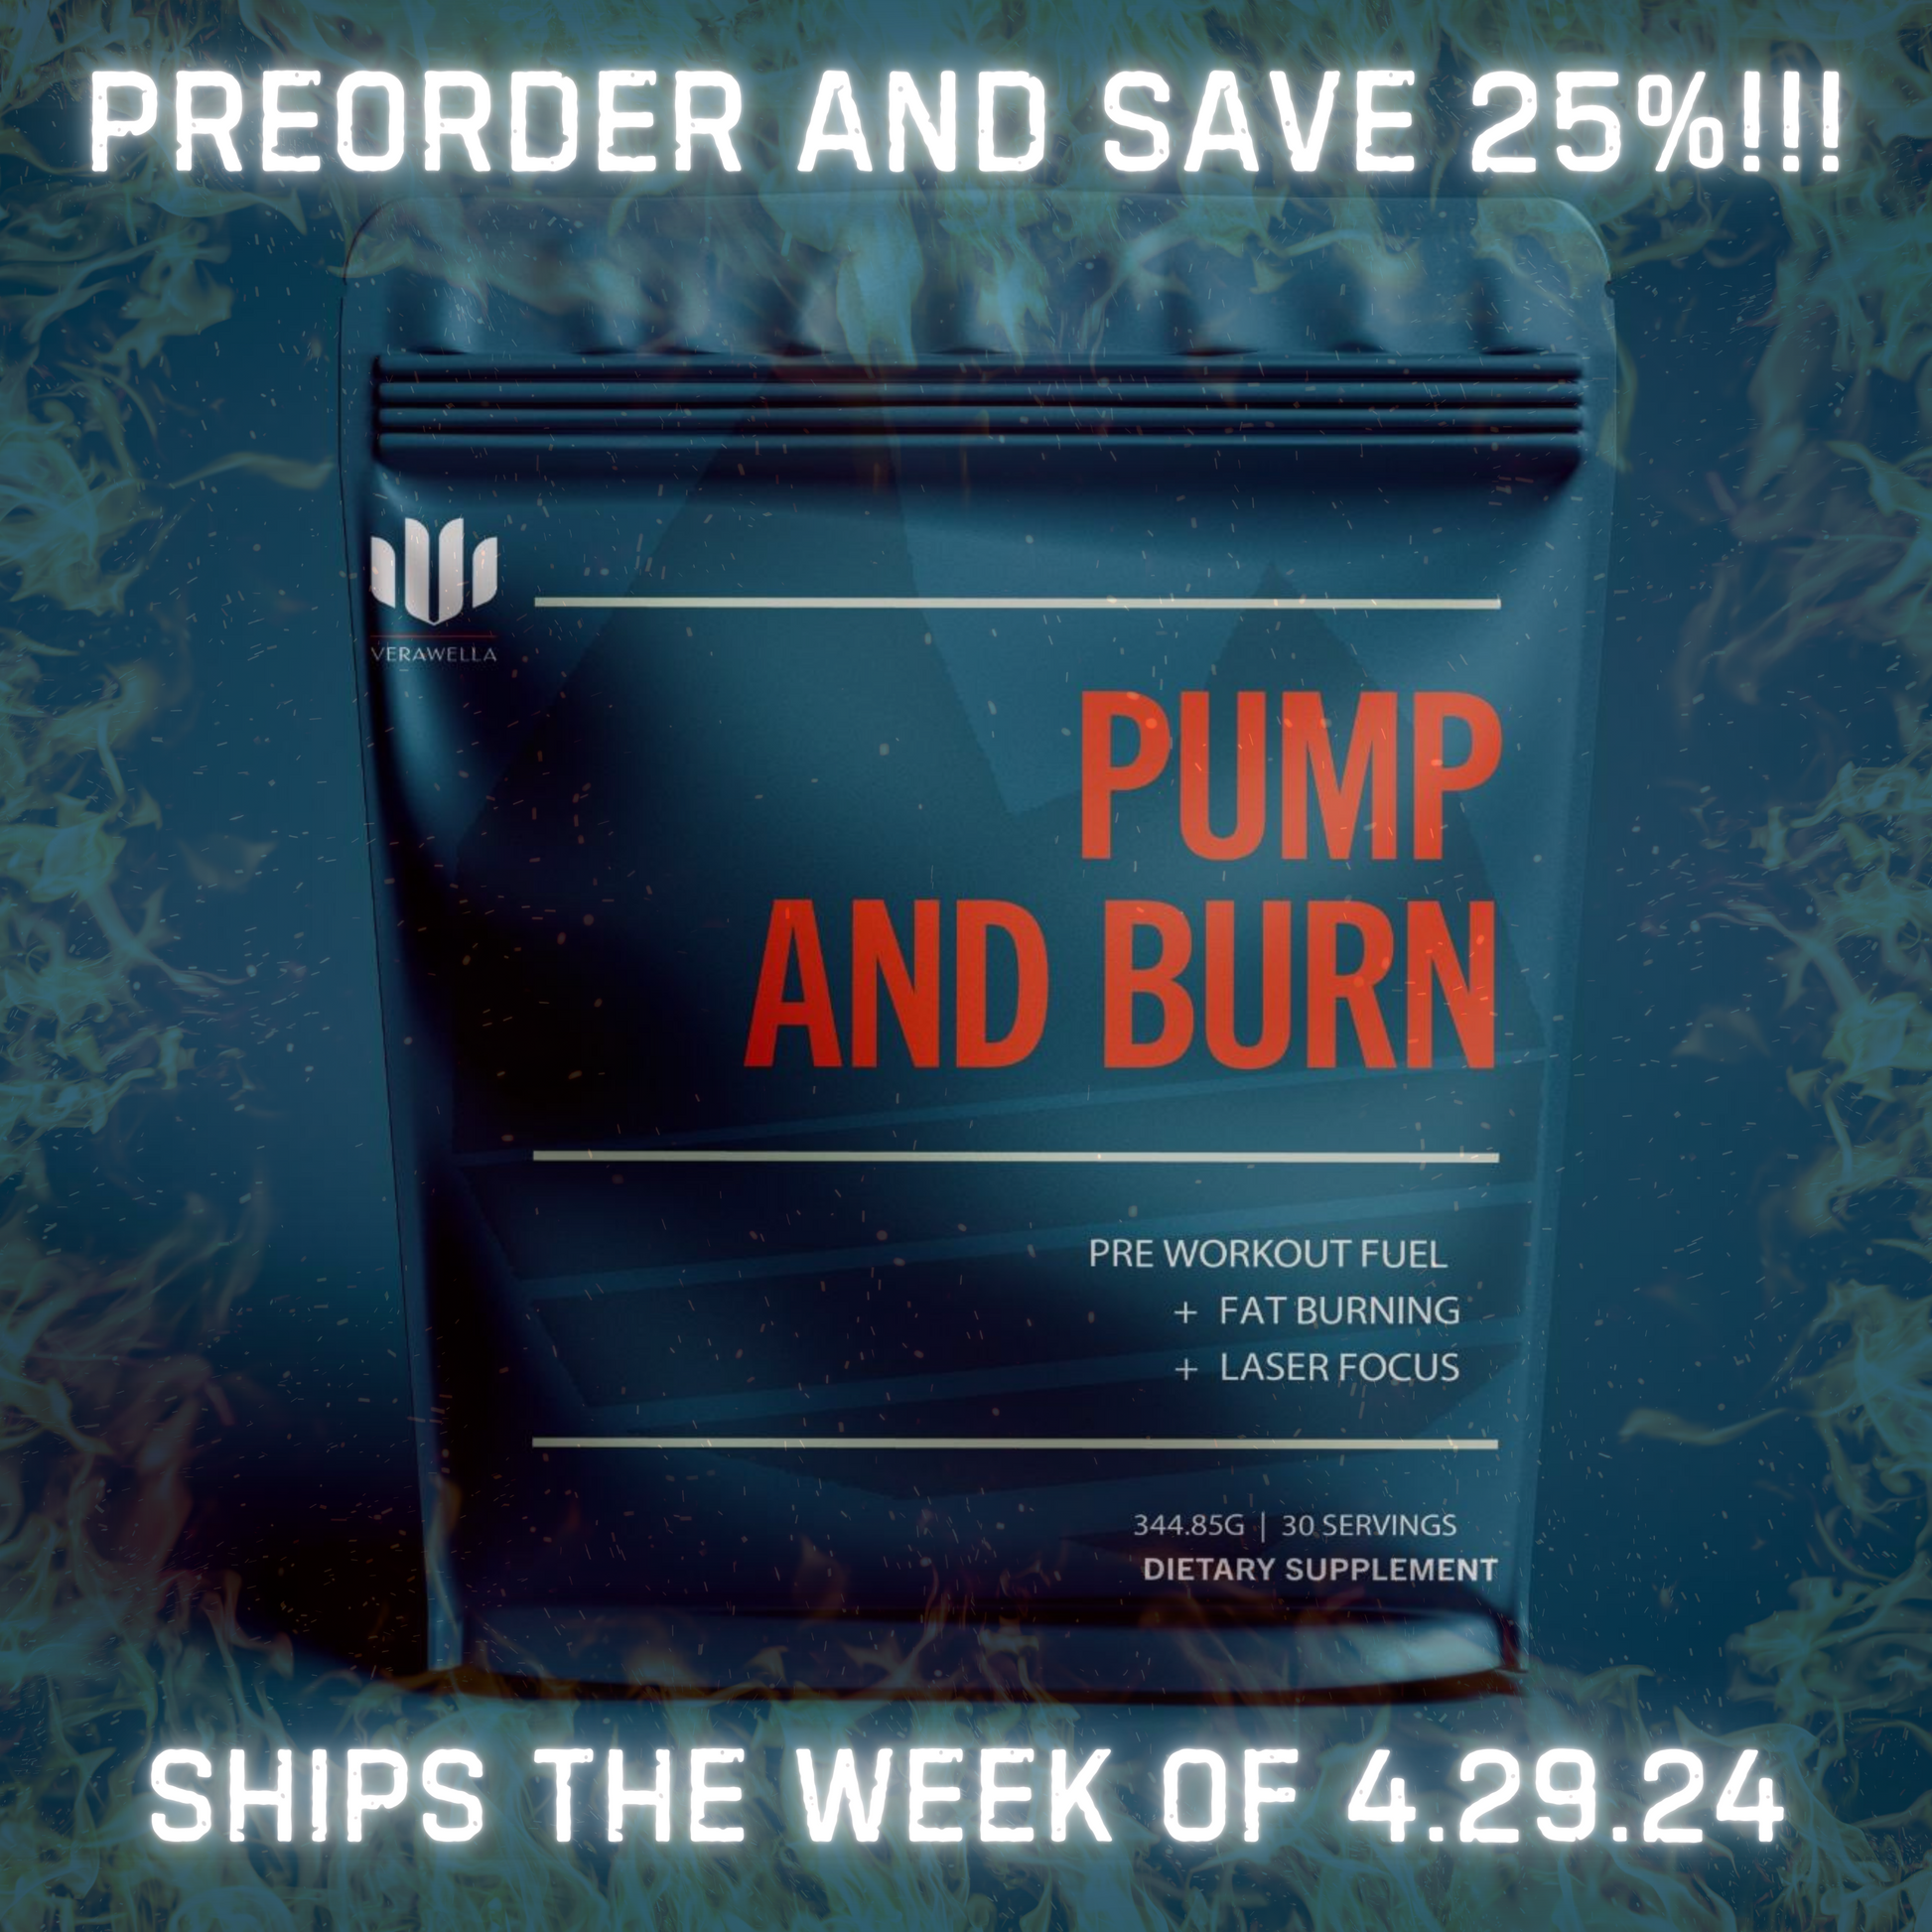 Preorder Pump and Burn the fat burning preworkout powder from Verawella. Ships the week of April 29th. 